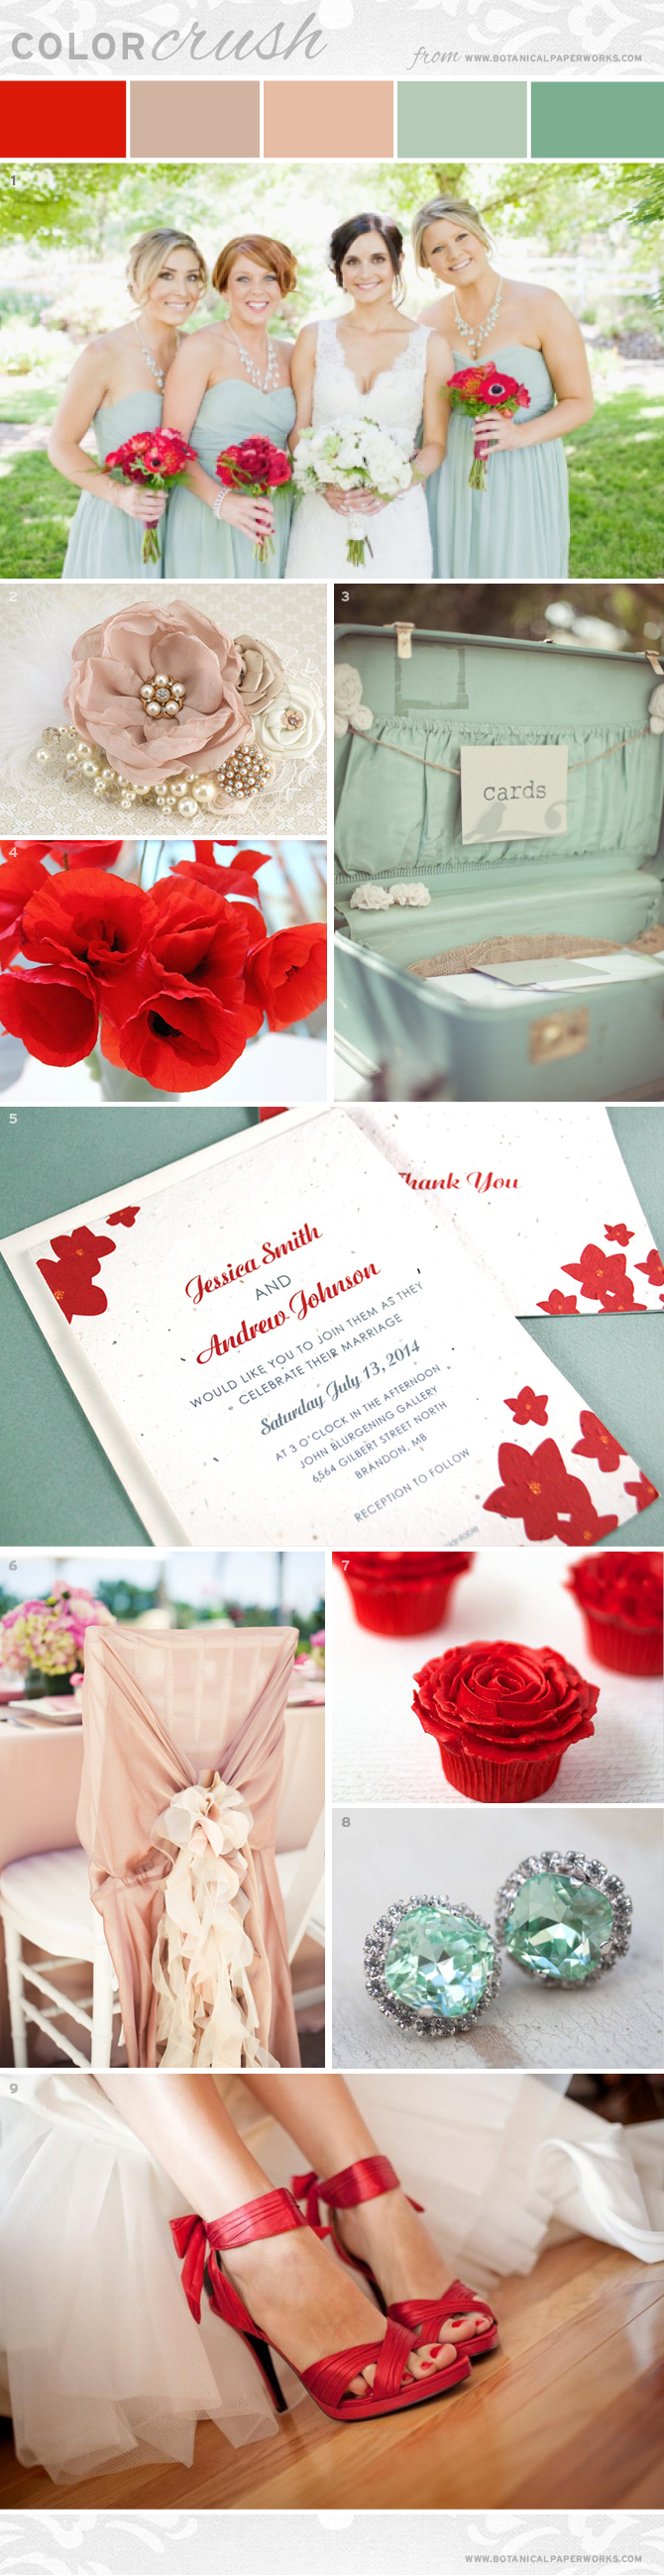 The soft and elegant pastels contrast beautifully with the vibrant and lively poppy red - perfect for all wedding styles.